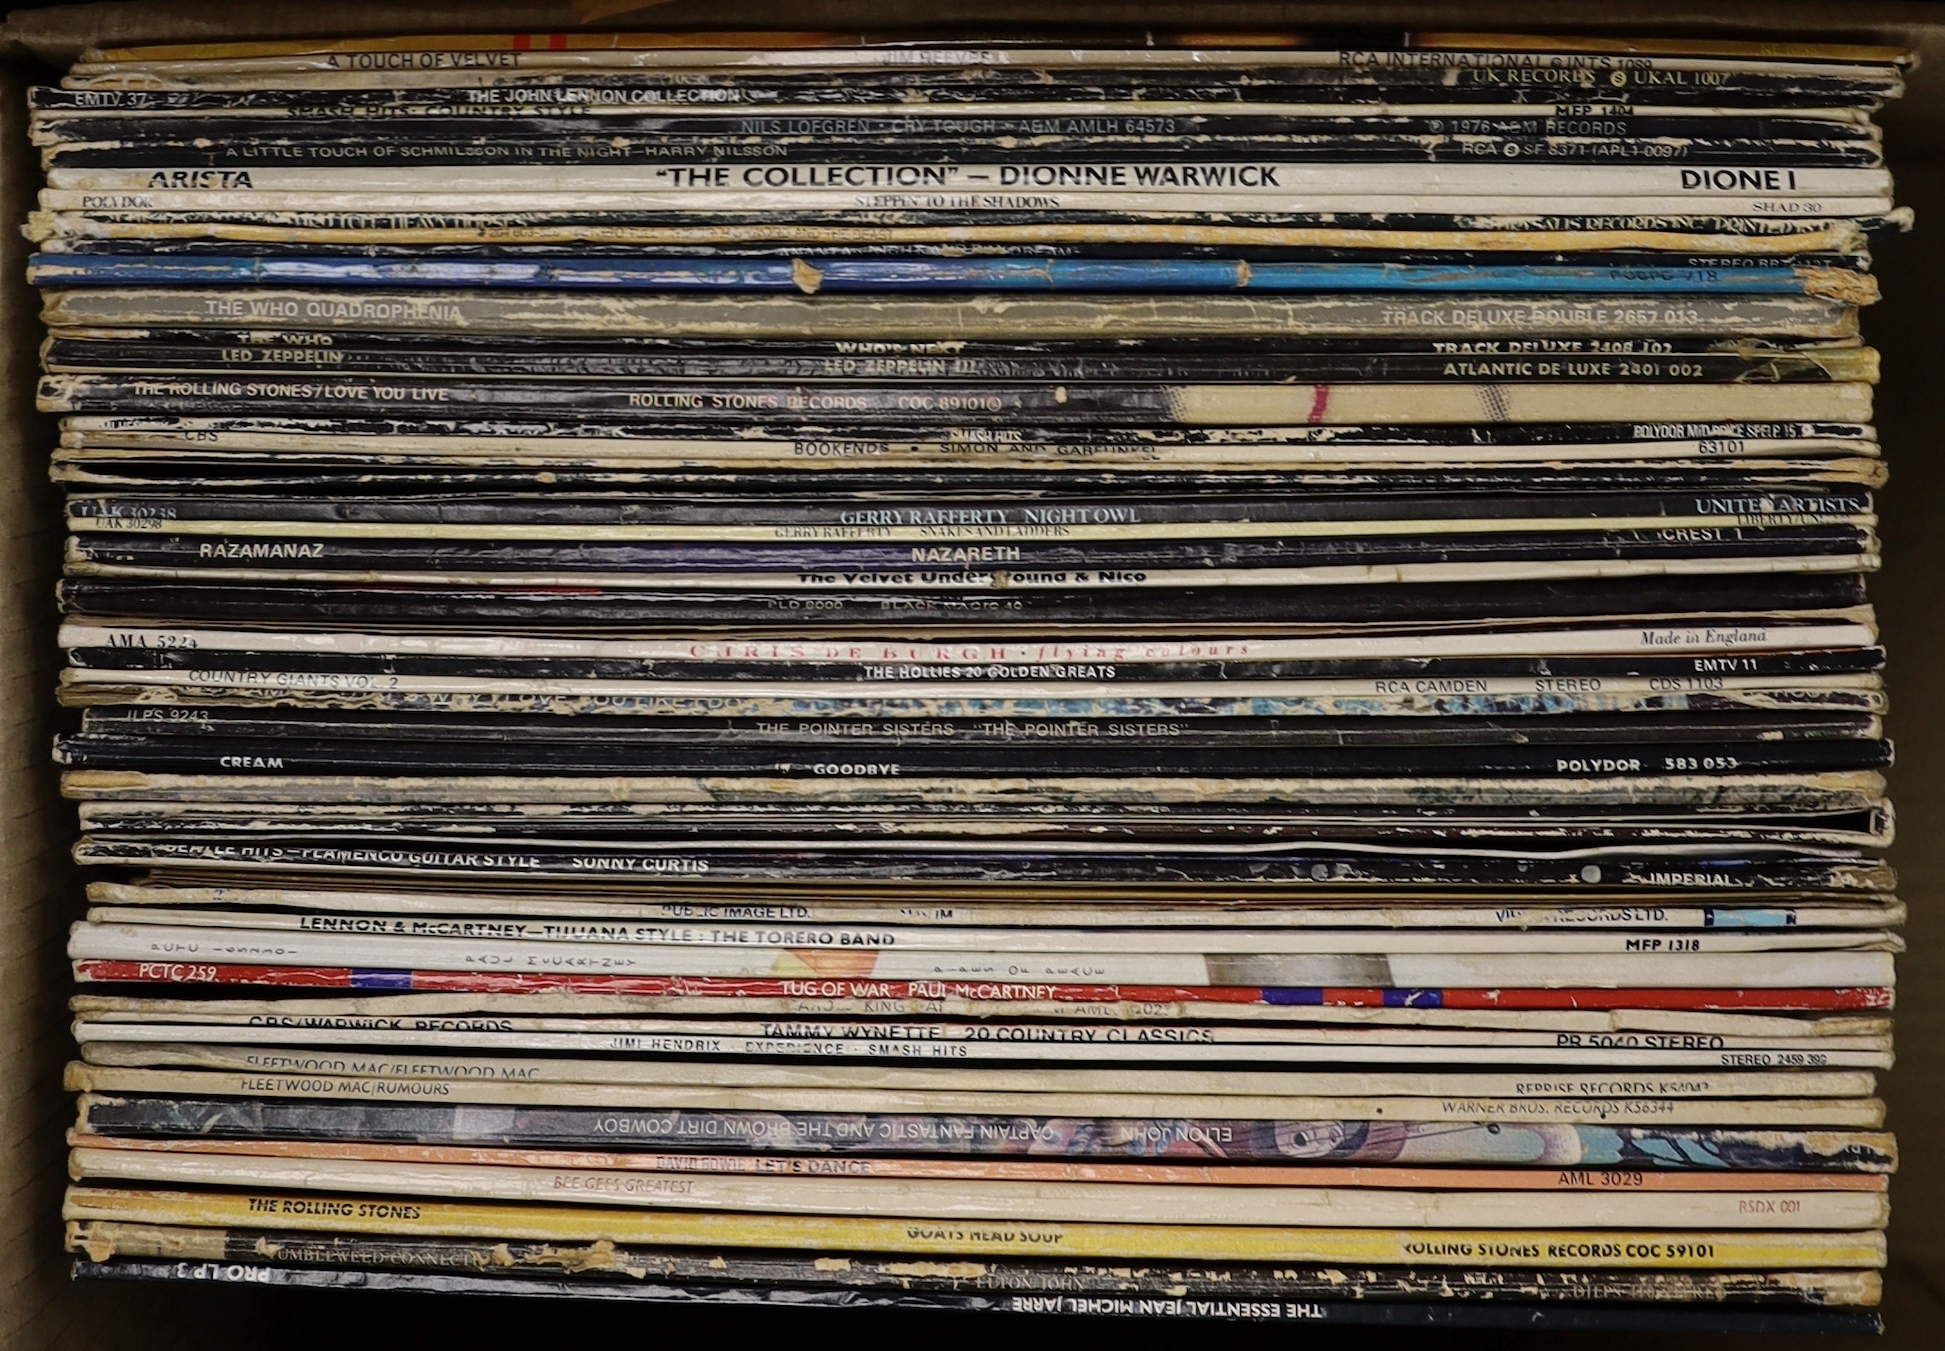 Fifty-eight mostly 1970's/80's LPs etc., including Jimi Hendrix, Tammy Wynette, Paul McCartney, Pink Floyd, Led Zeppelin, cream, The Pointer Sisters, The Hollies, The Velvet Underground, Rolling Stones, The Who, the Beat